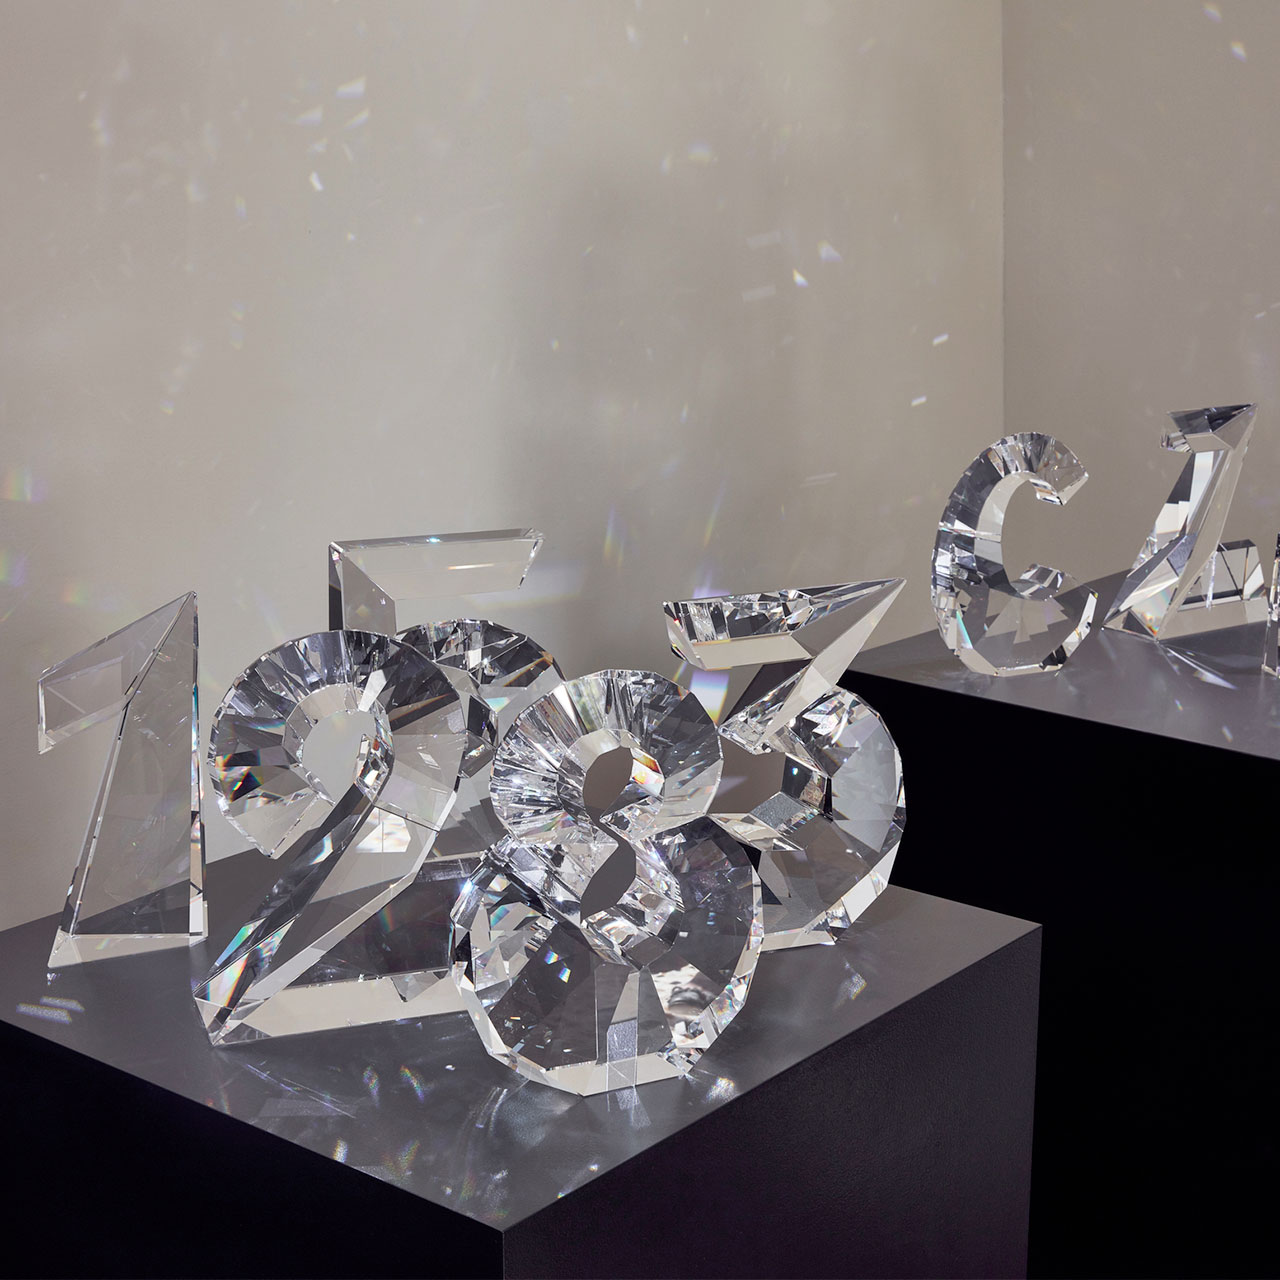 MDW16: Swarovski's Partners with Top Designers on New Luxury Home Collection